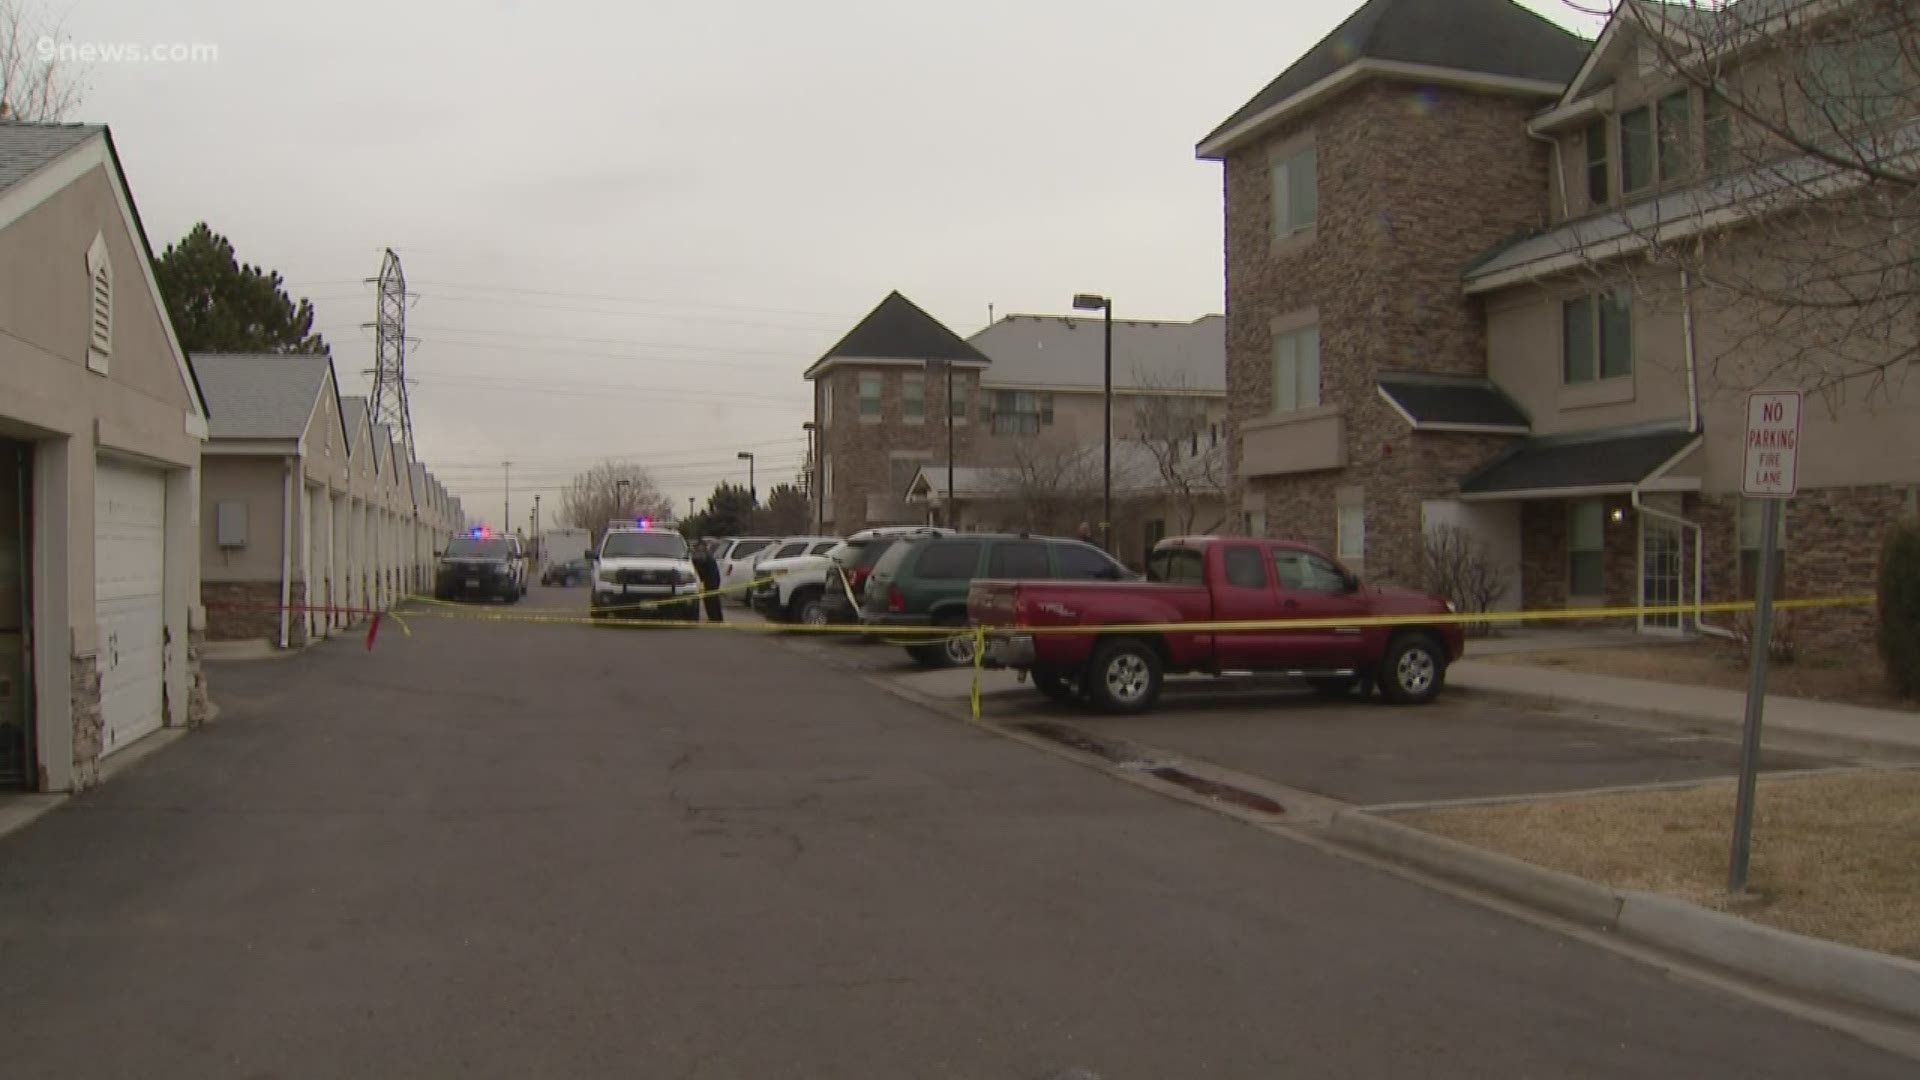 The shooting happened Monday morning near 6th Avenue and Potomac Street in Aurora.